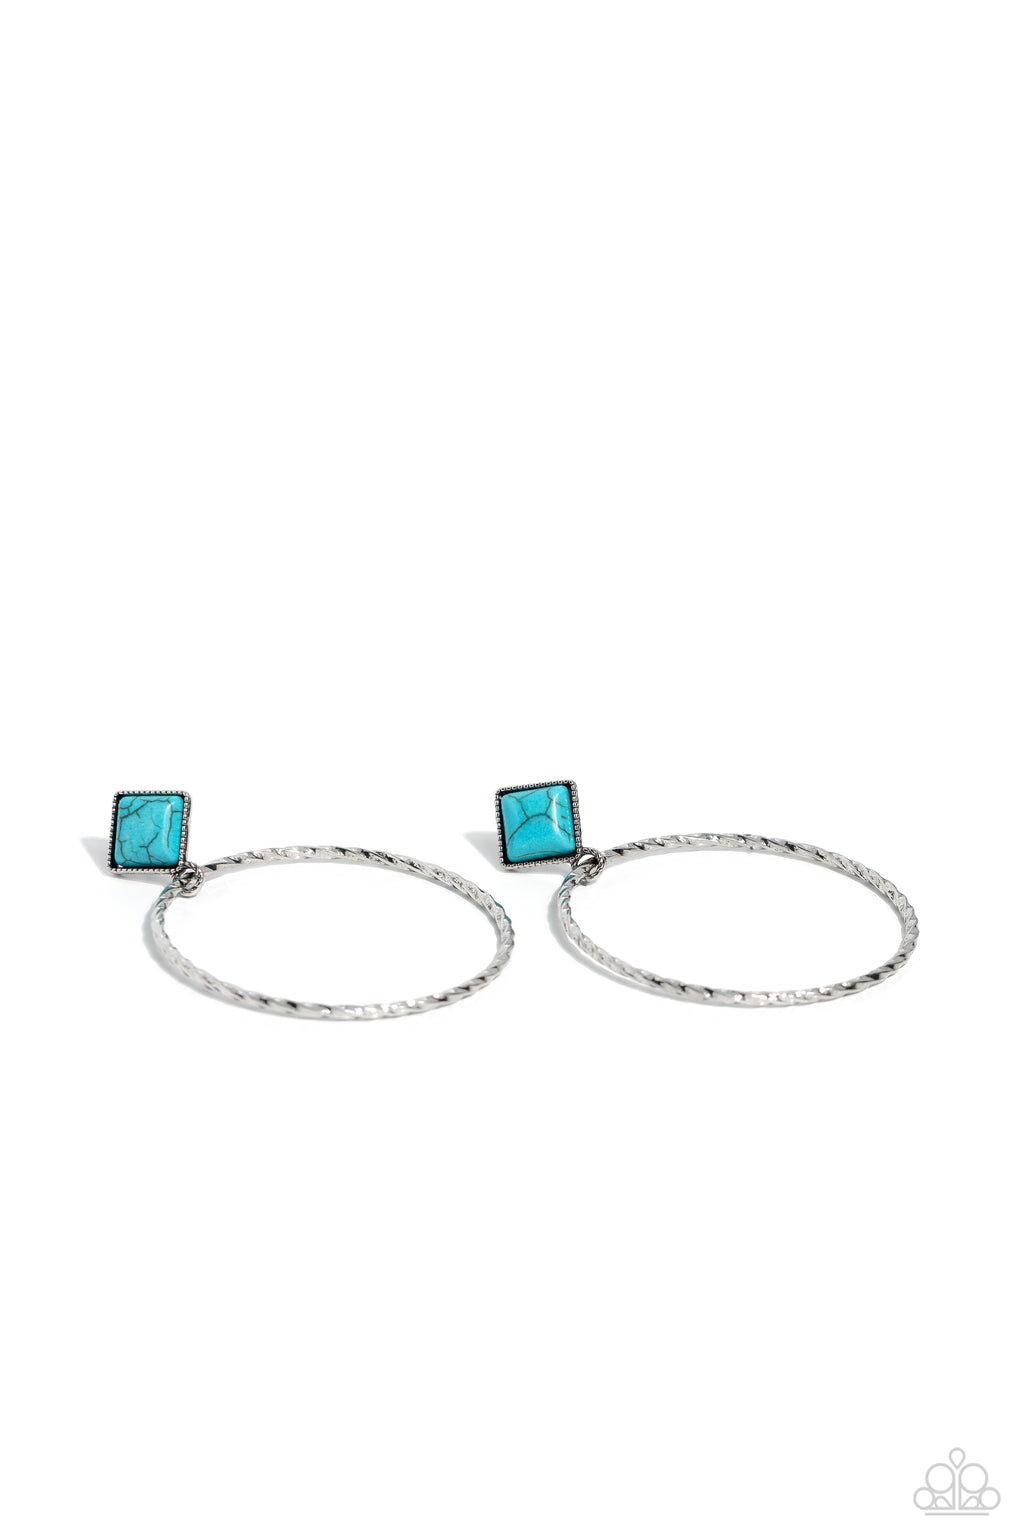 five-dollar-jewelry-canyon-circlet-blue-post earrings-paparazzi-accessories